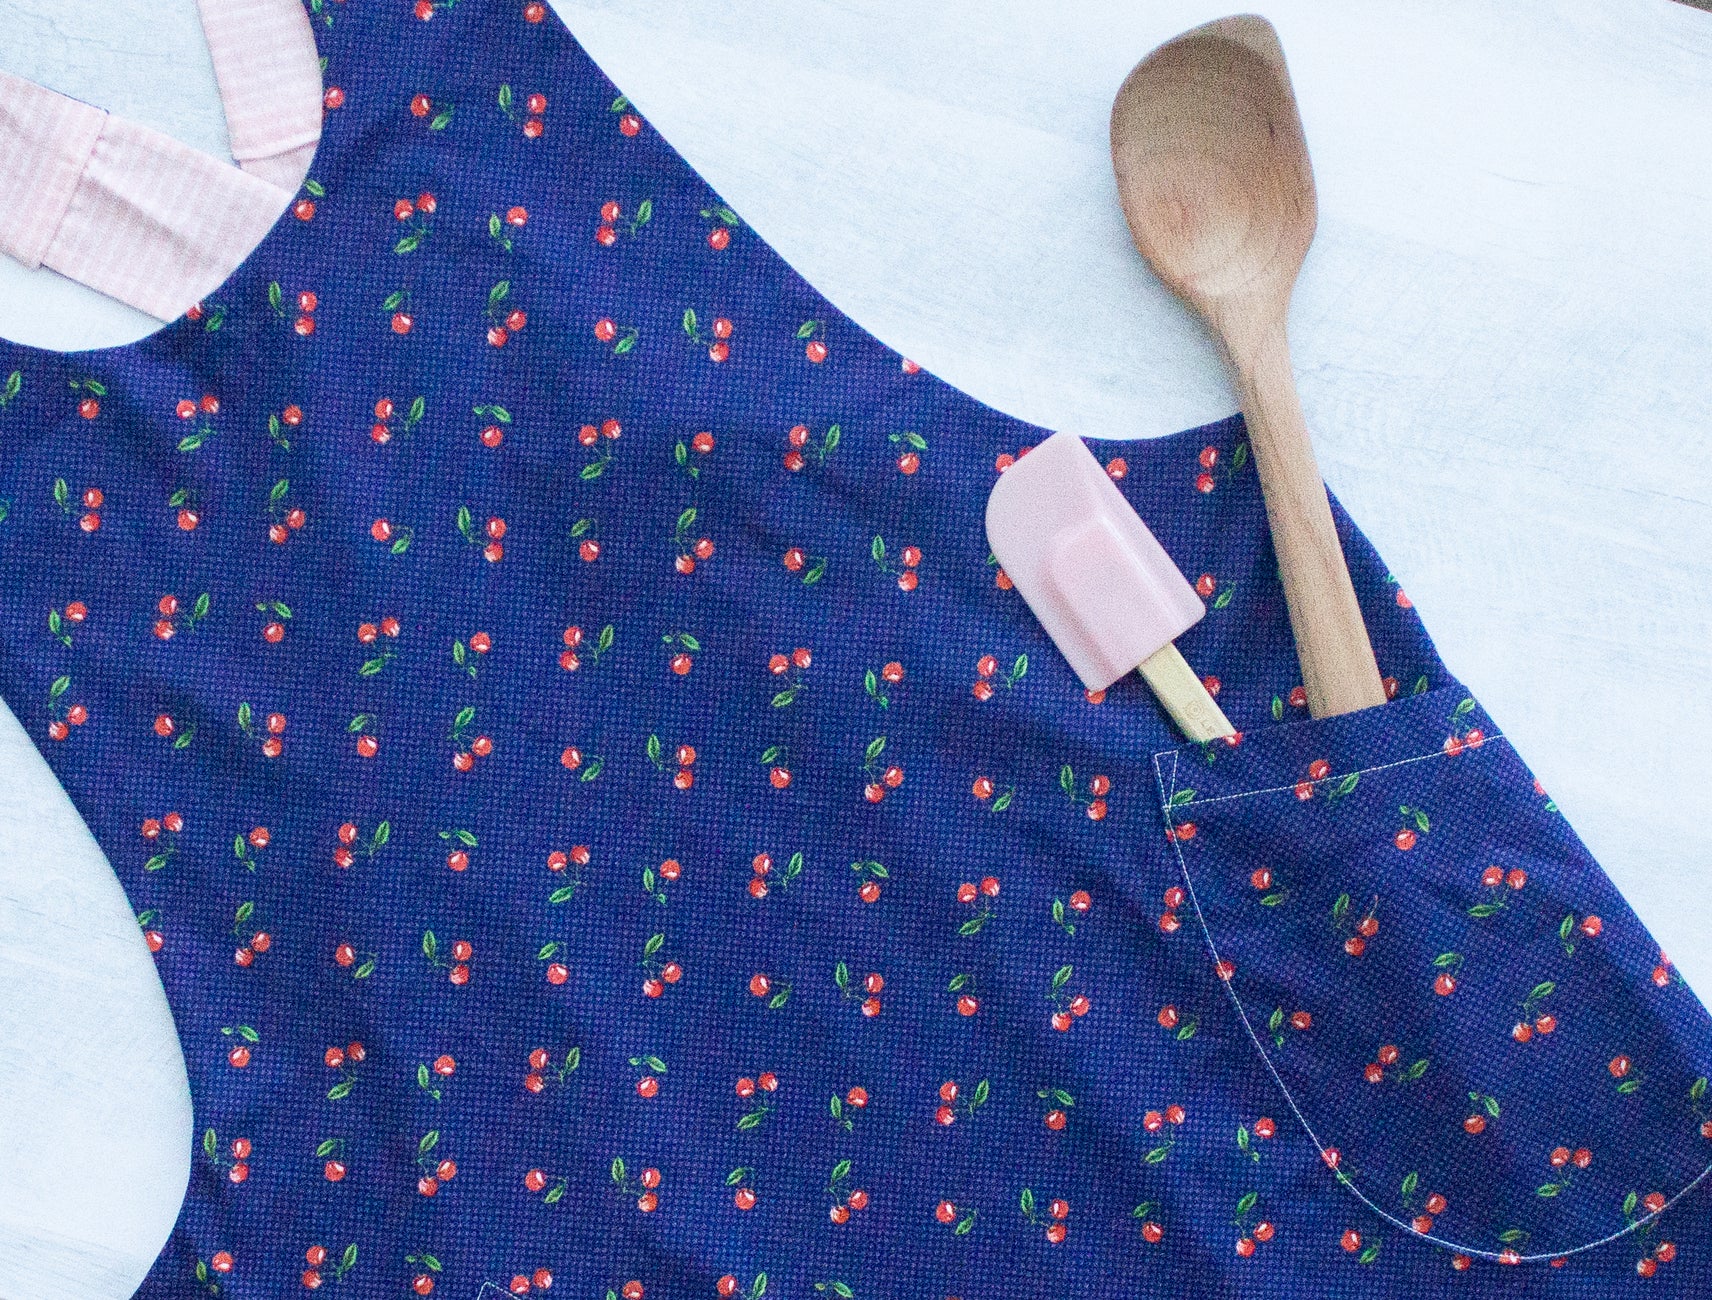 Reversible Smock with Pockets